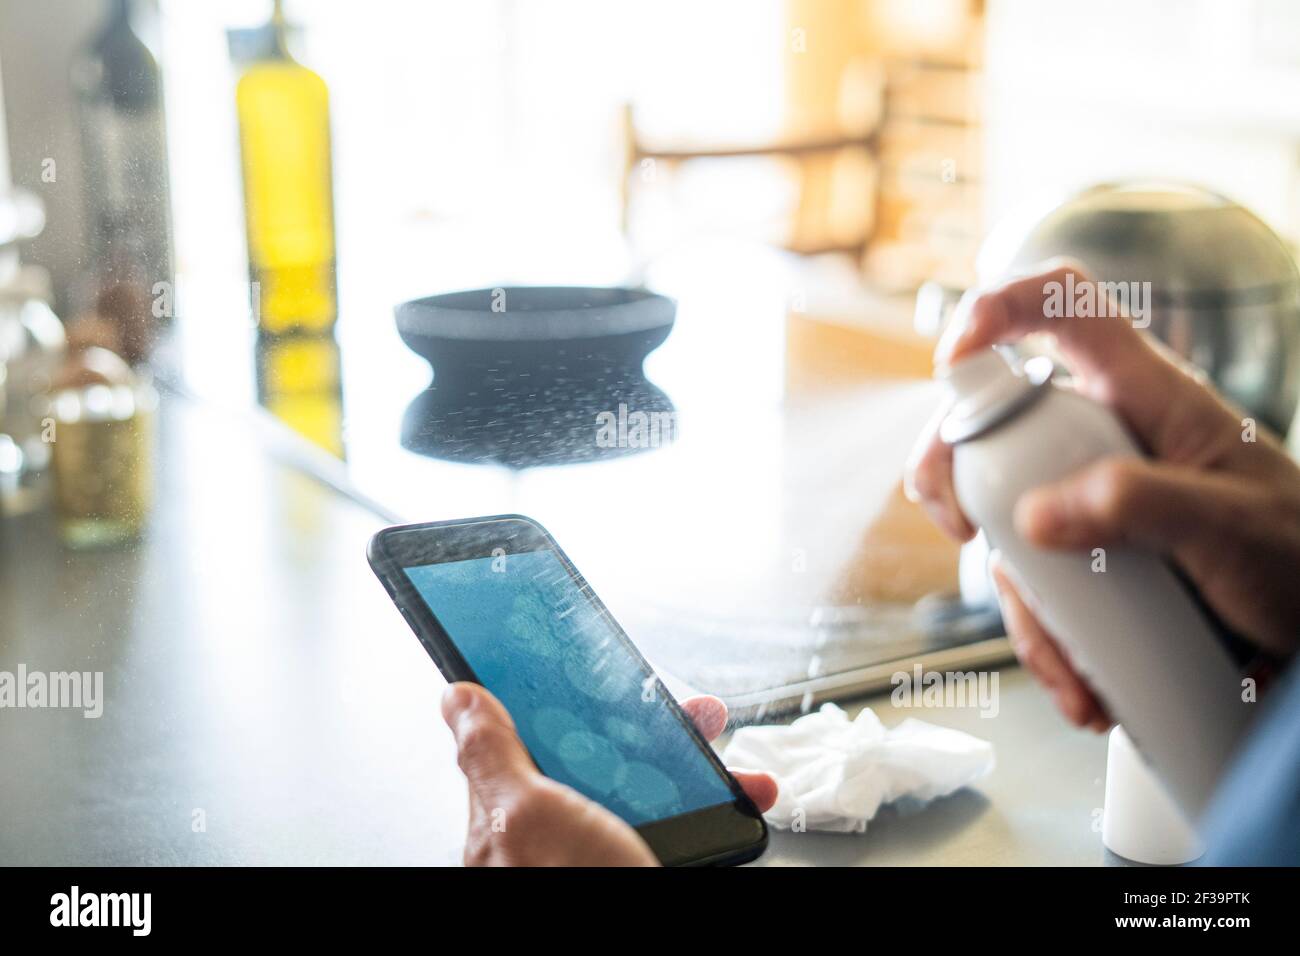 Close-up of woman's hands spraying disinfectant on smartphone at home Stock Photo